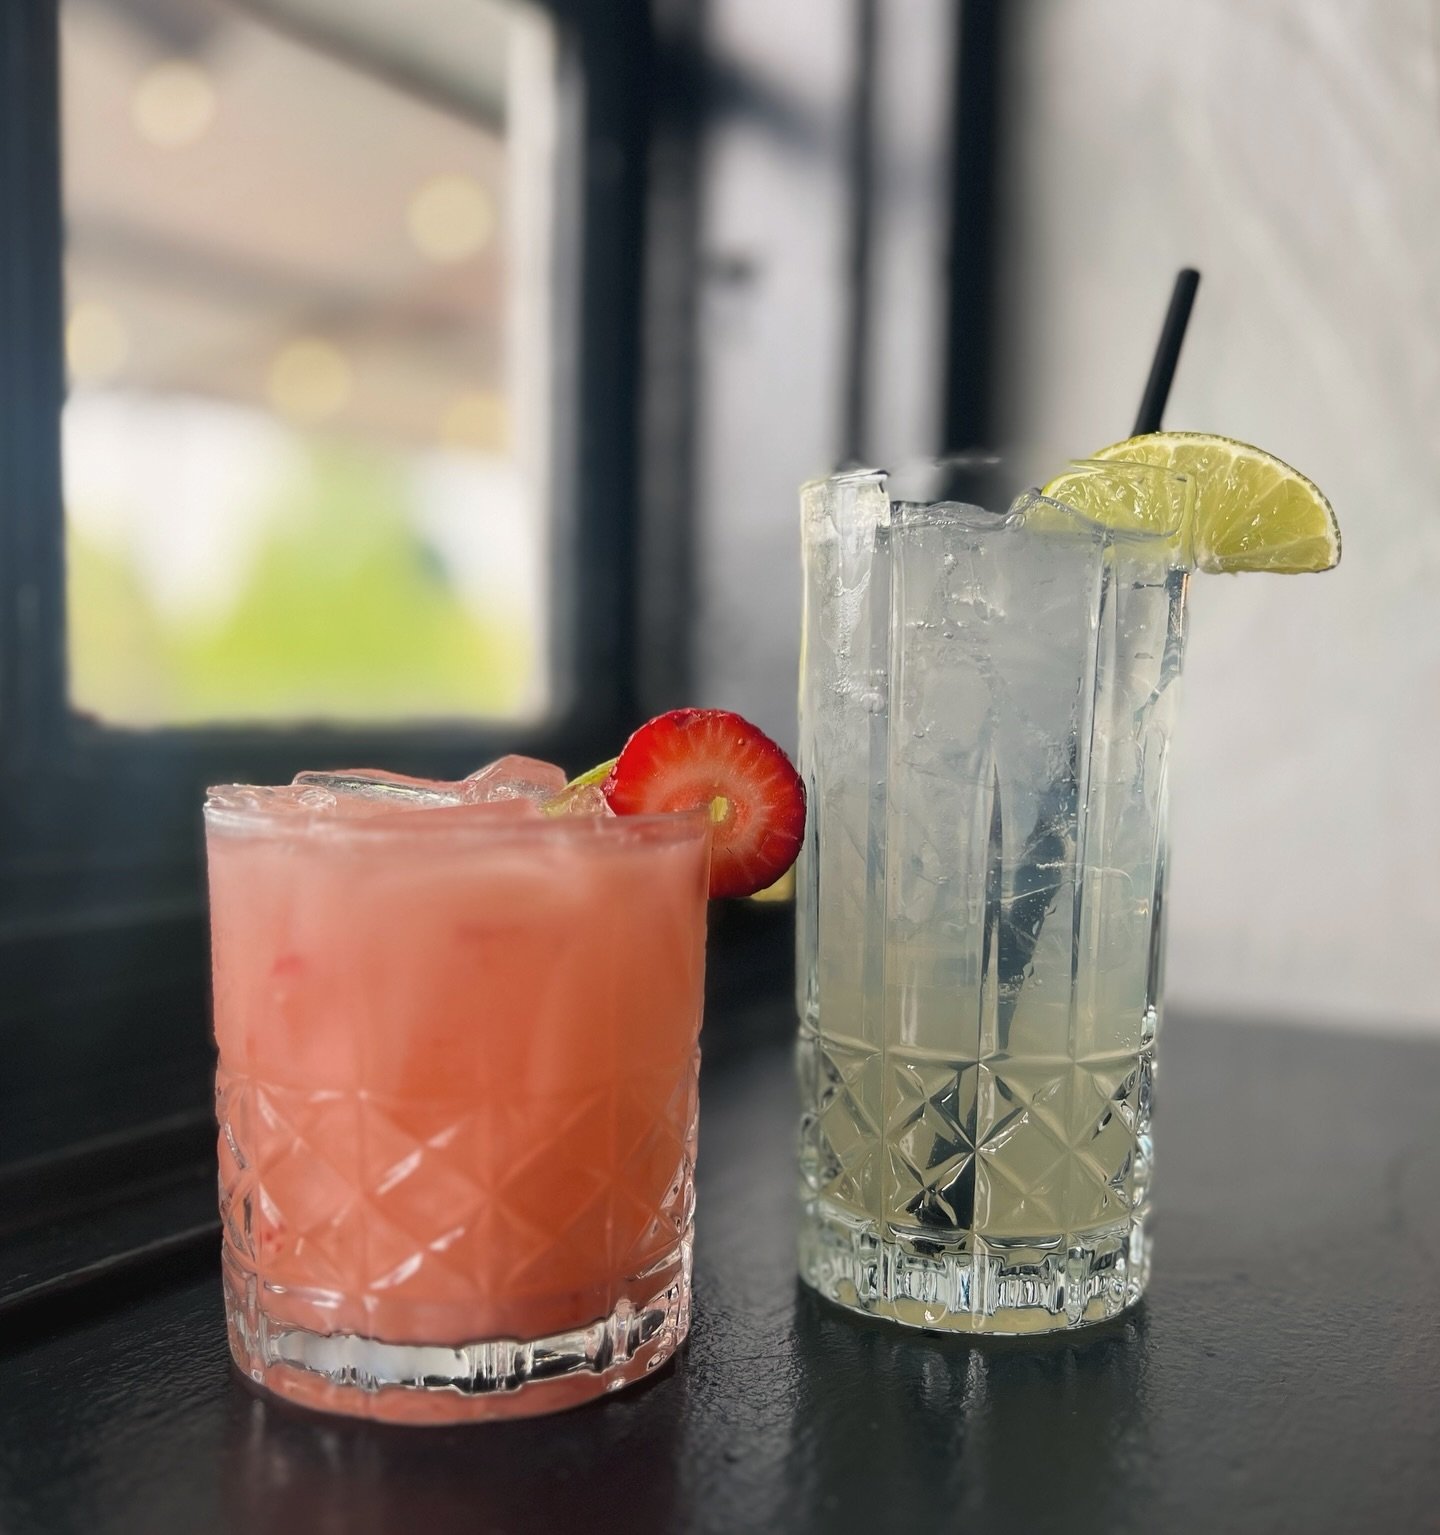 Pre gaming Cinco de Mayo with our favorite tequila- @agavalestequila! Happy Hour from 4-6! Live music from @willpaquettemusic  5-8pm🎶

📸STRAWBALE&rsquo;S MARG &amp; SUMMER RANCH WATER!